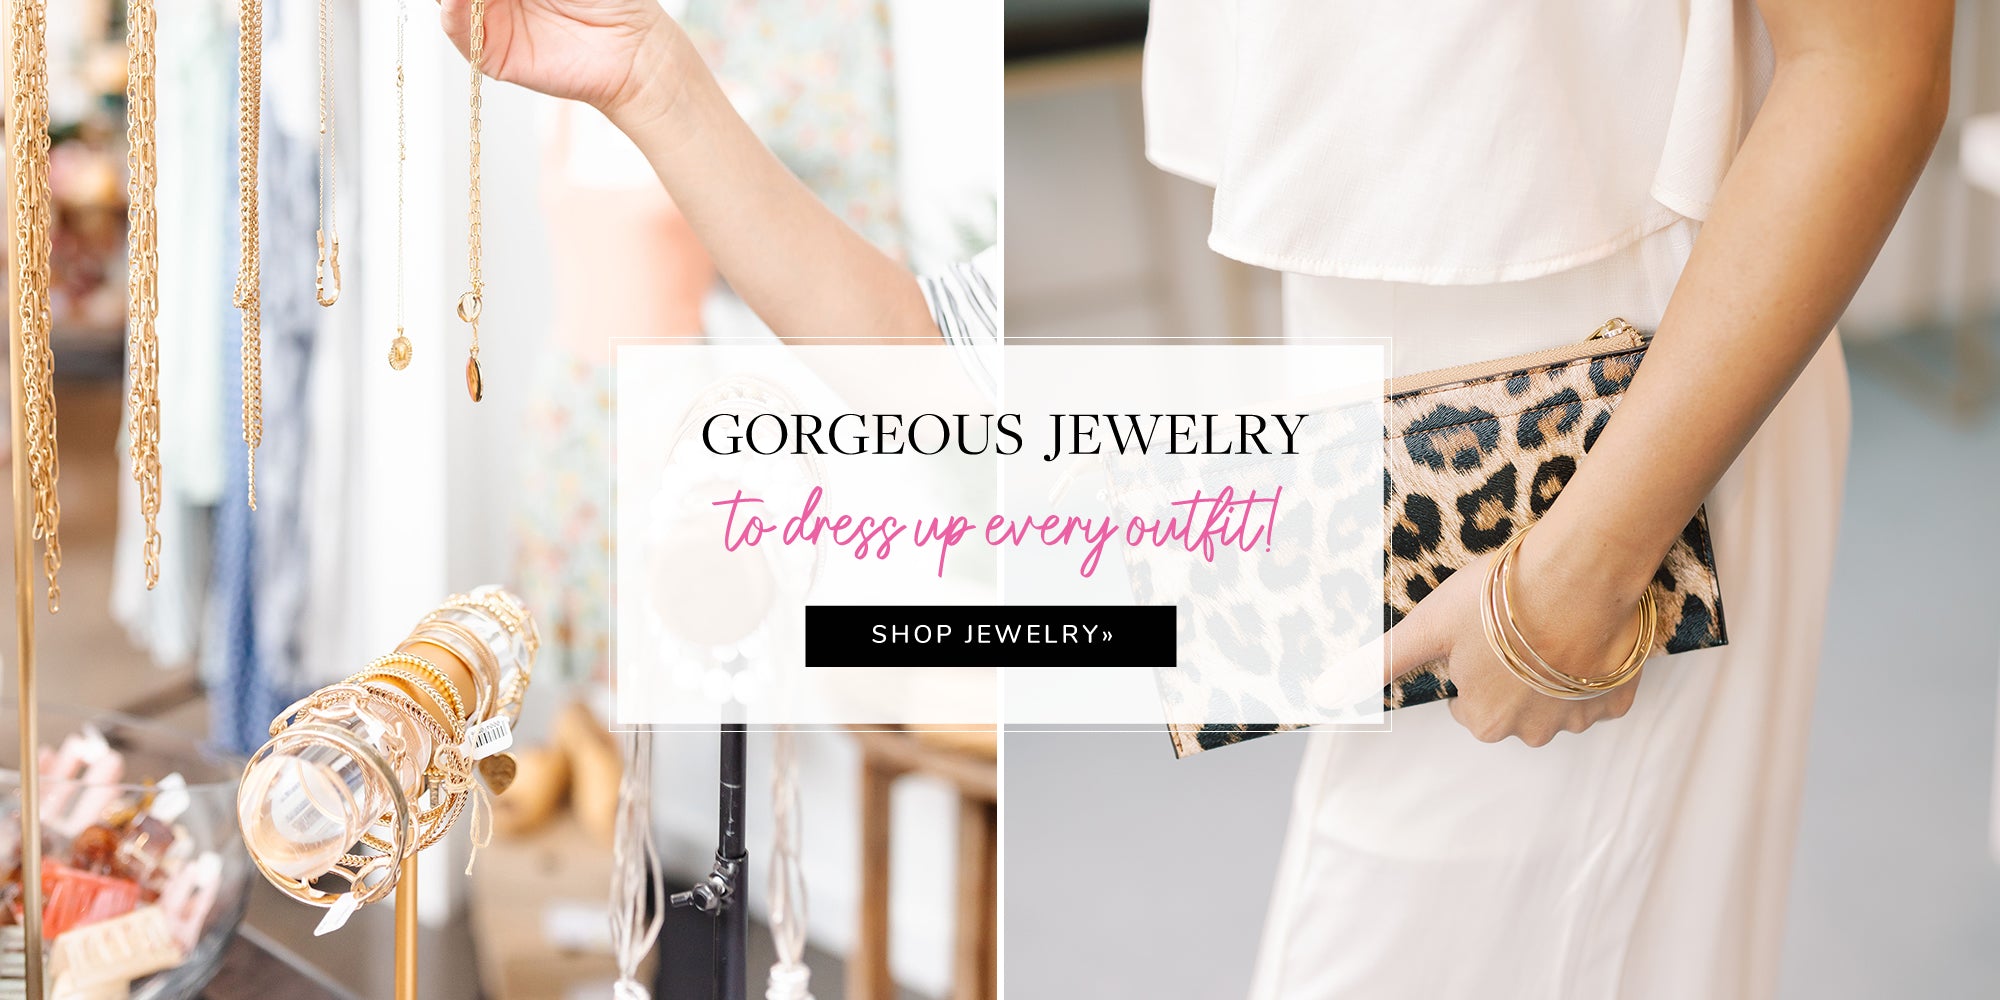 Gorgeous jewelry and accessories!